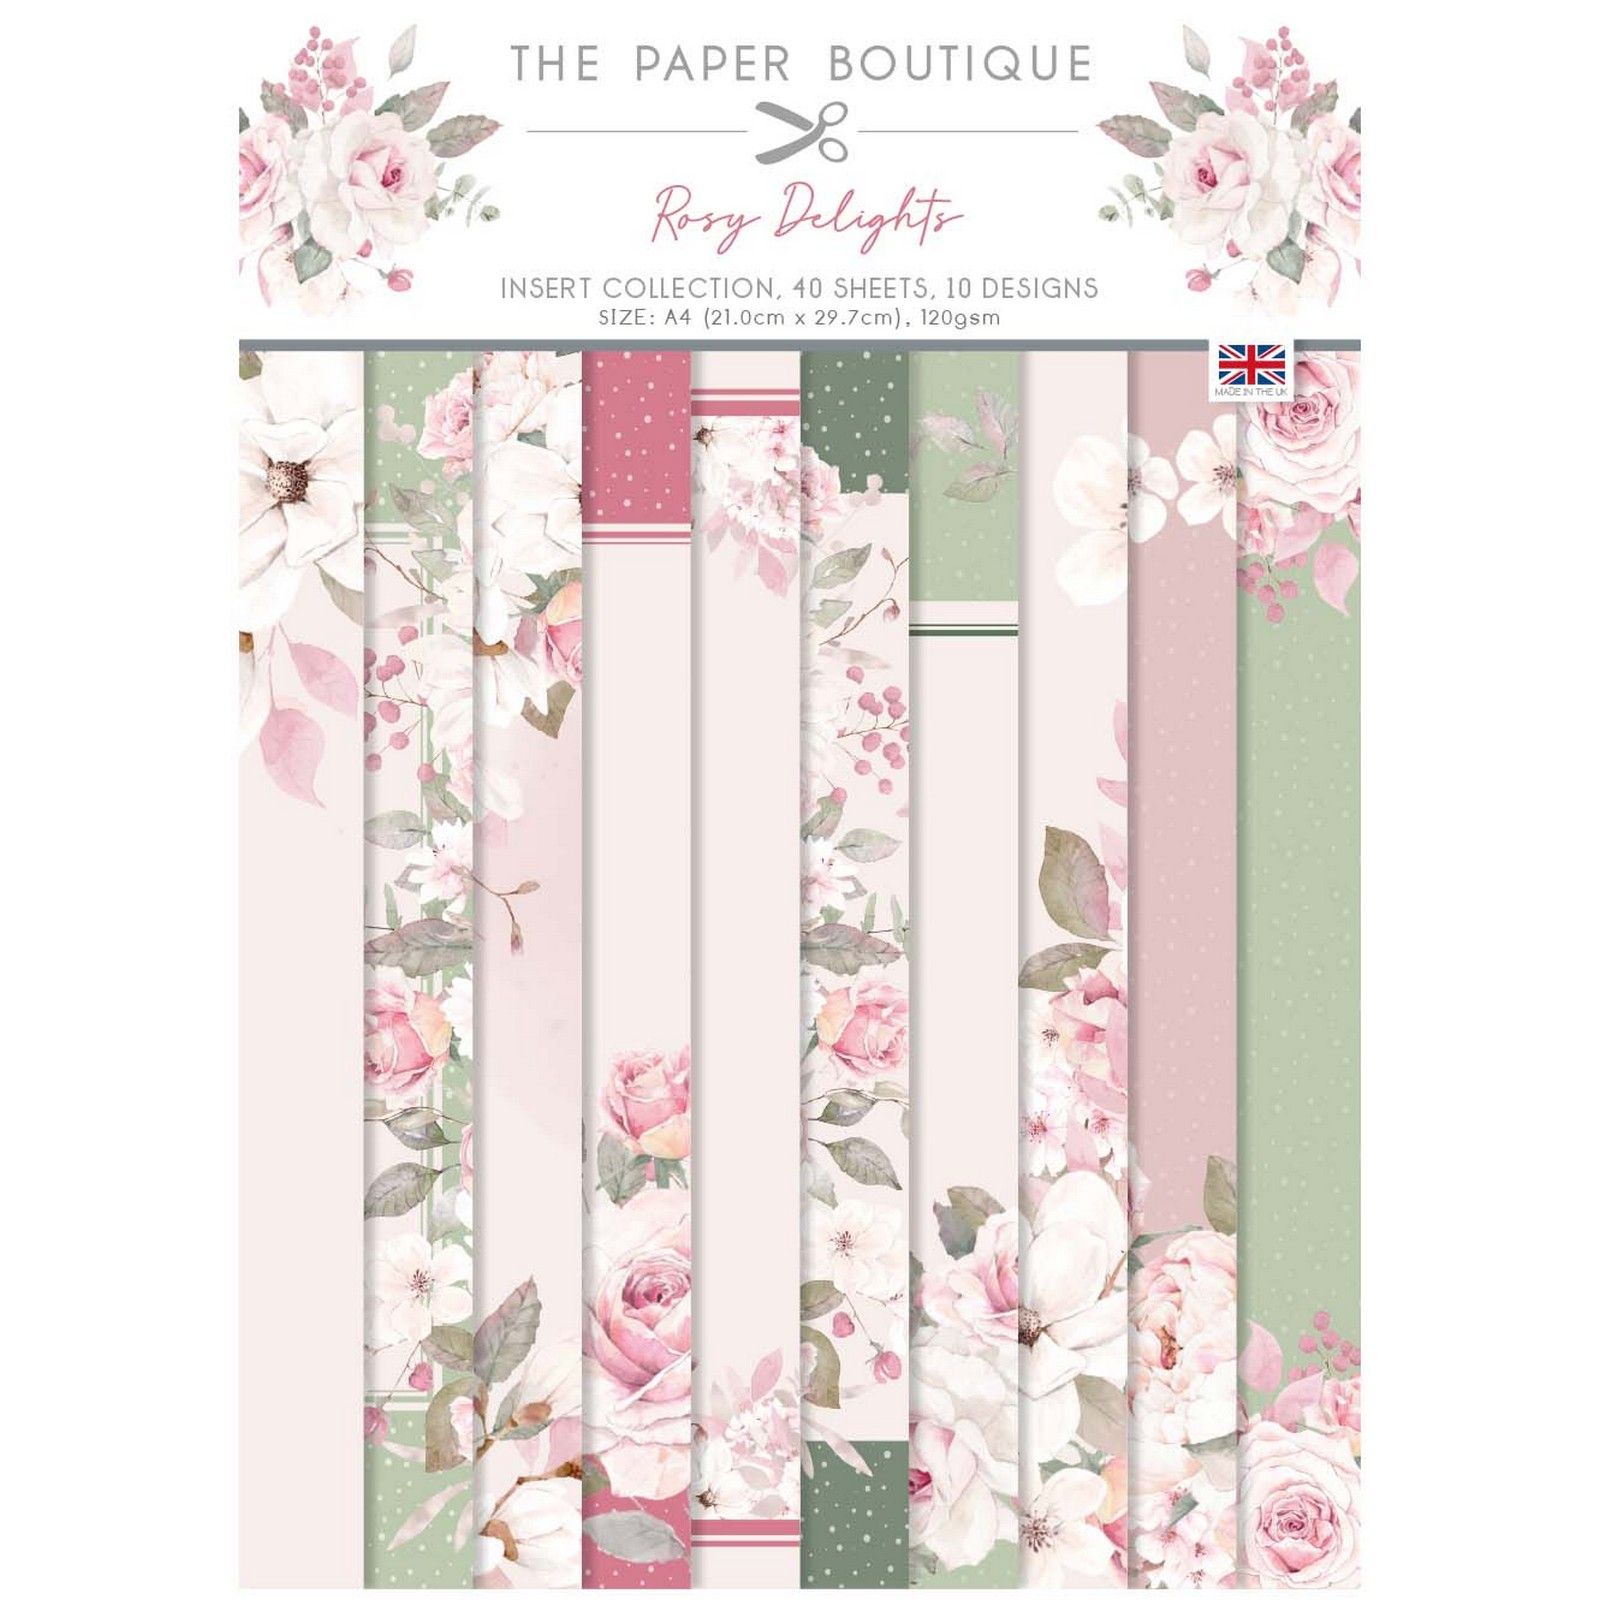 The Paper Boutique • Rosy delights insert collection